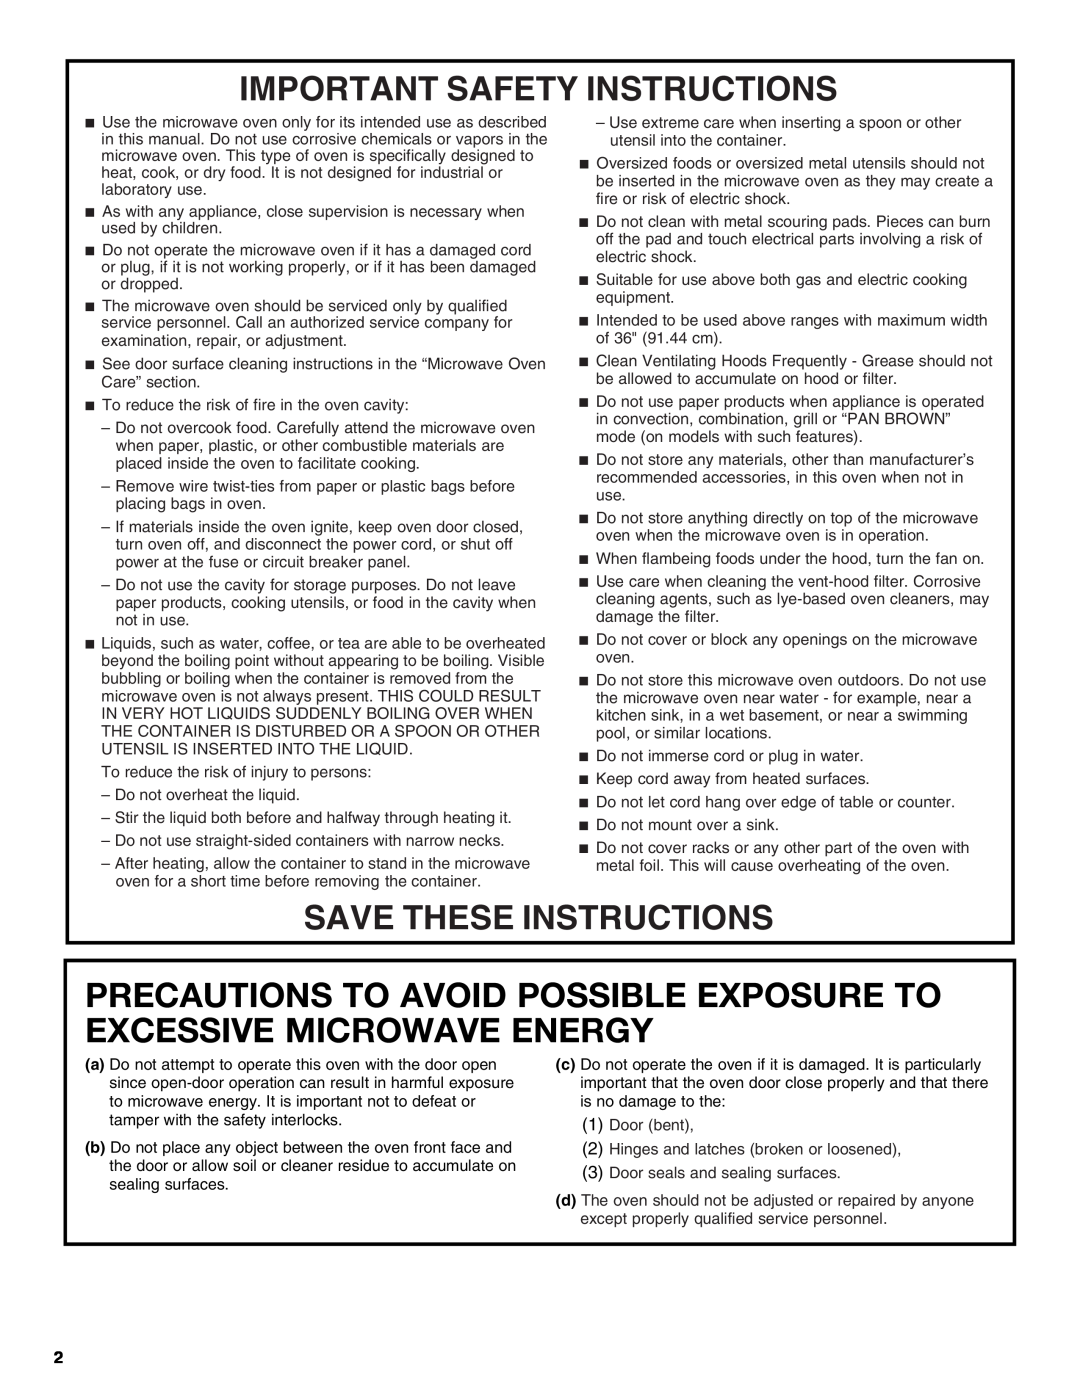 Whirlpool GMH5205XVQ Precautions To Avoid Possible Exposure To Excessive Microwave Energy, Important Safety Instructions 